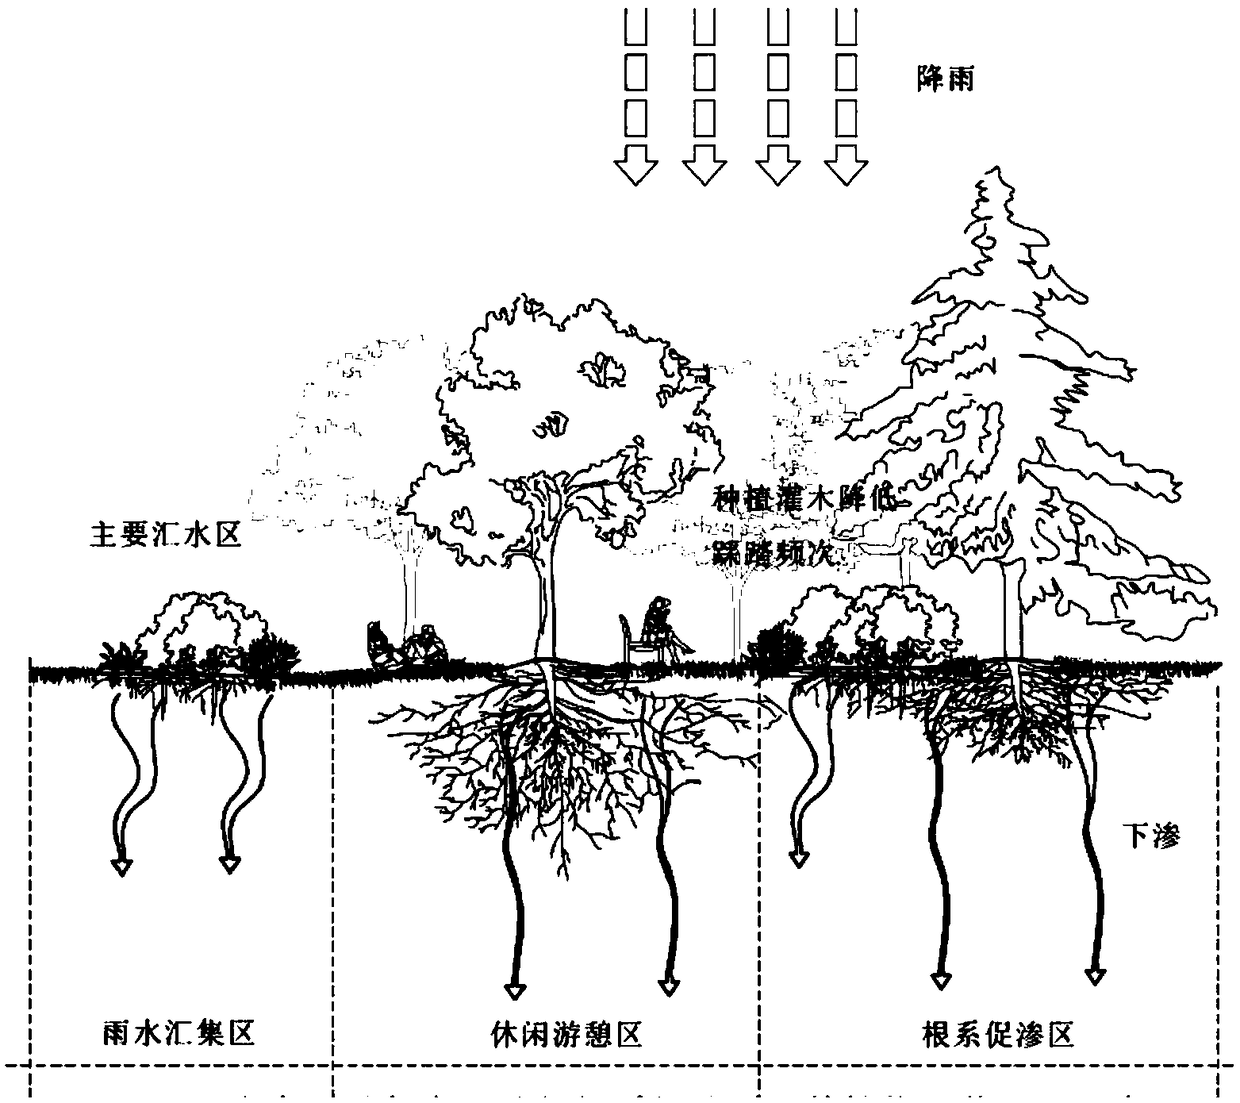 Method for constructing root system permeation enhancing landscape plant community